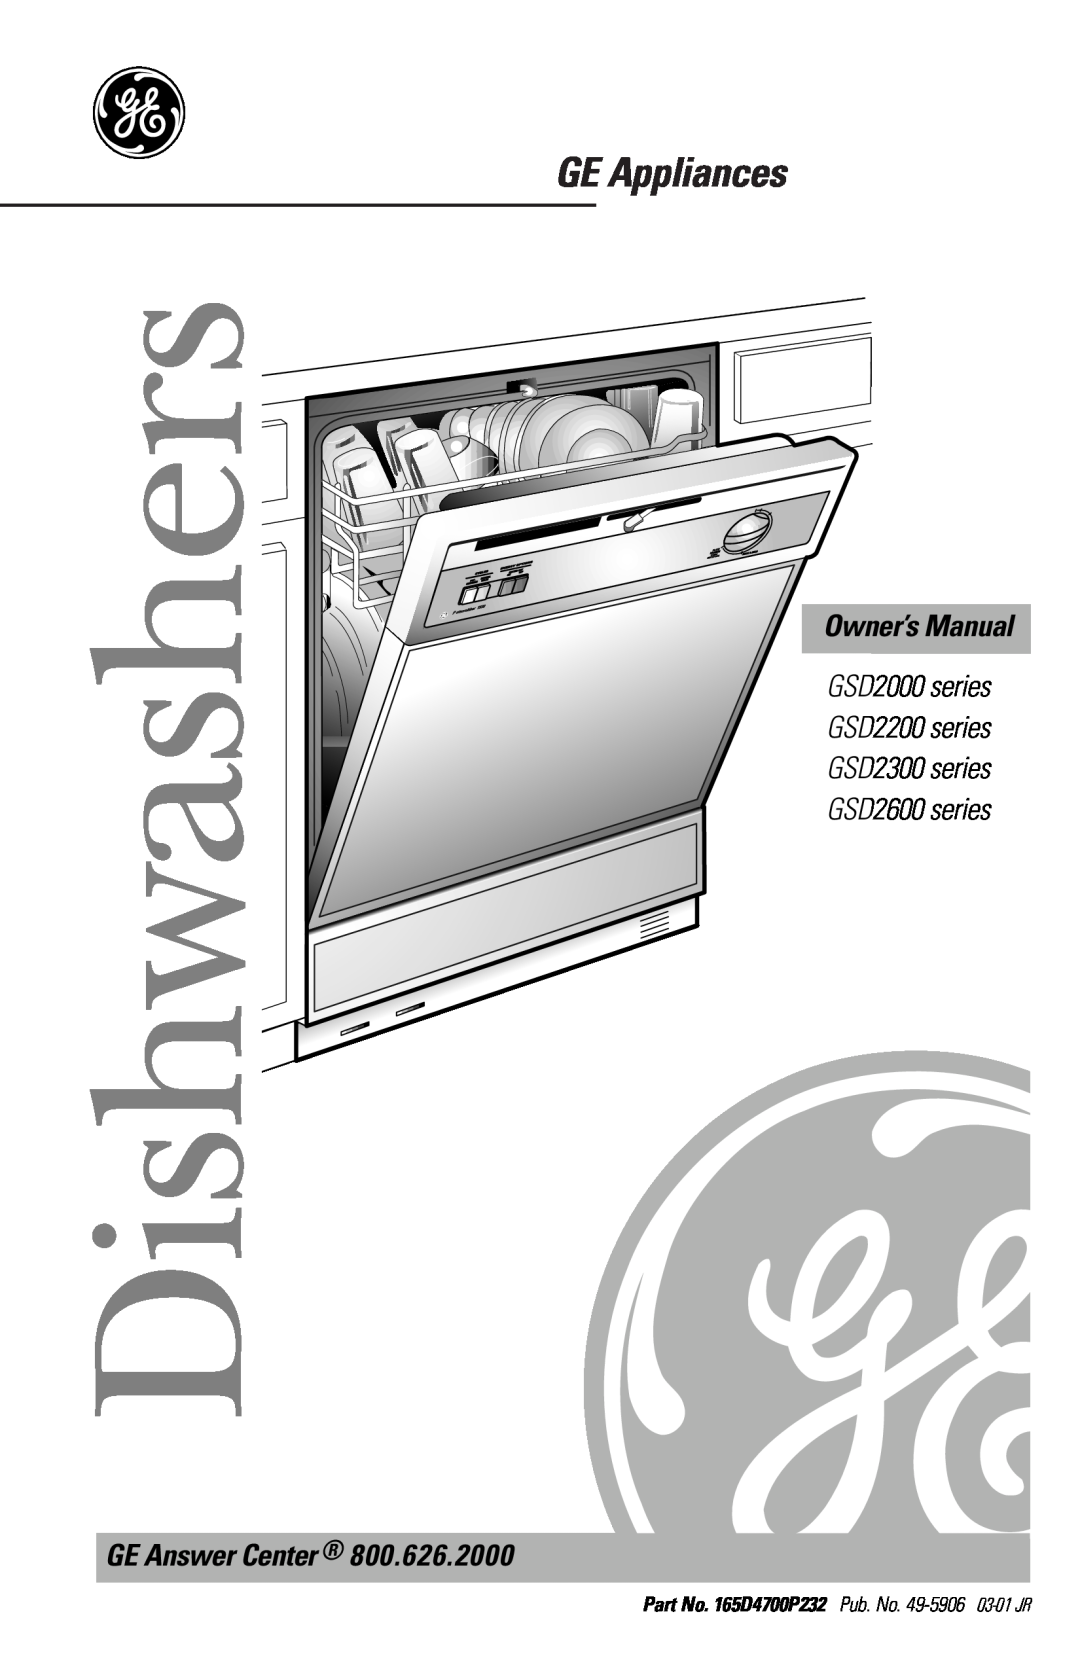 GE GSD2300, GSD2600 owner manual GE Appliances, Owner’s Manual, GE Answer Center, Dishwashers 